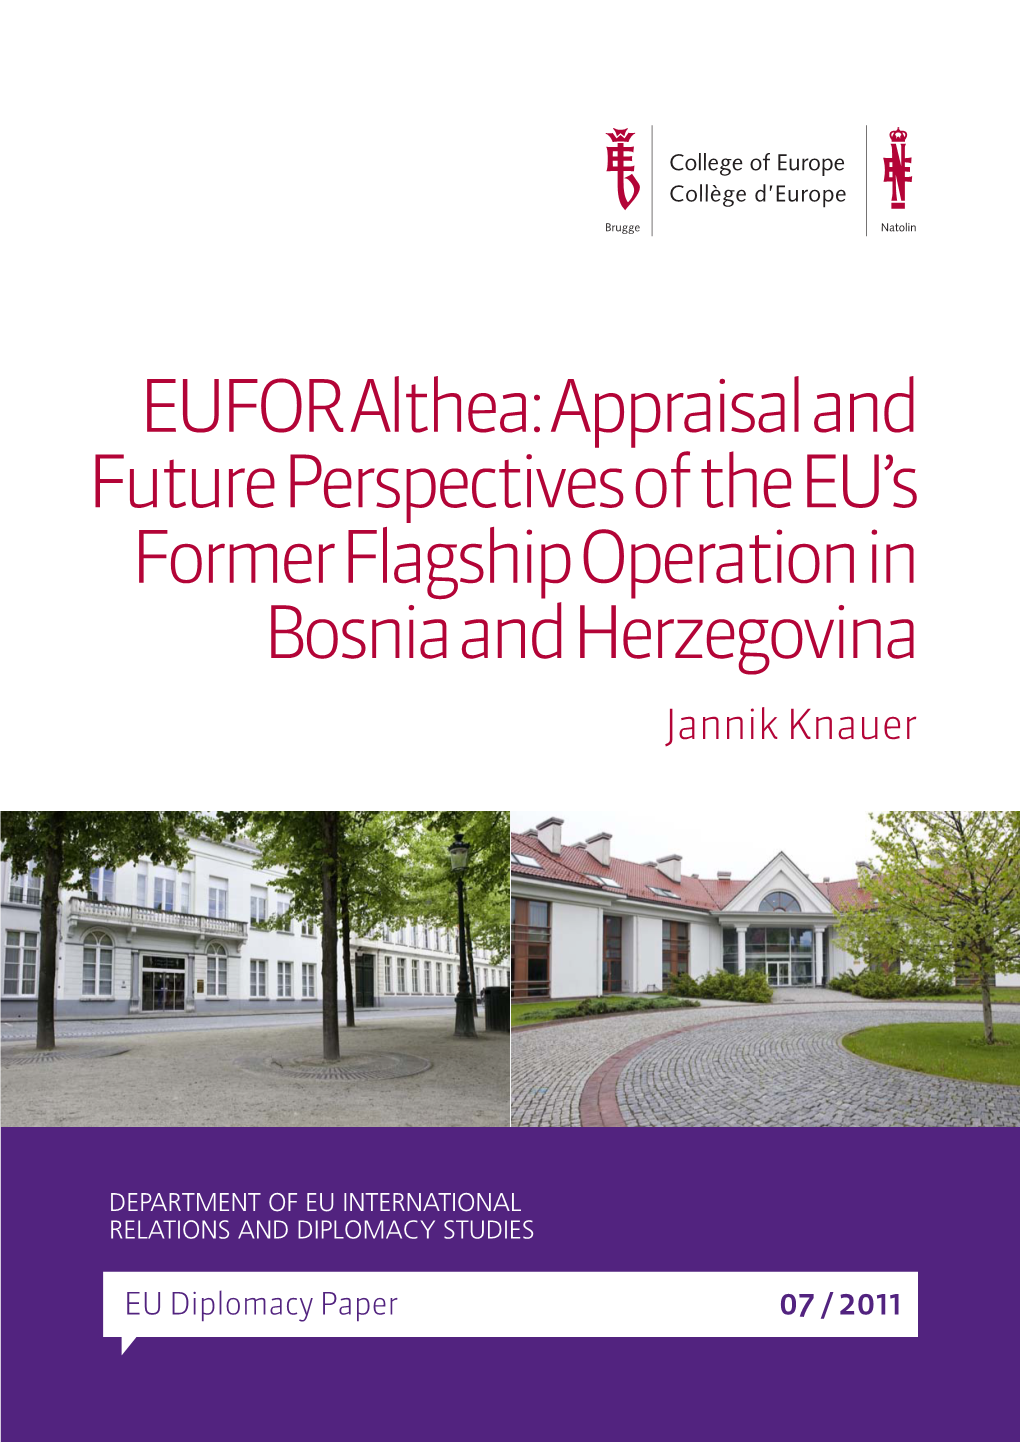 EUFOR Althea: Appraisal and Future Perspectives of the EU’S Former Flagship Operation in Bosnia and Herzegovina Jannik Knauer